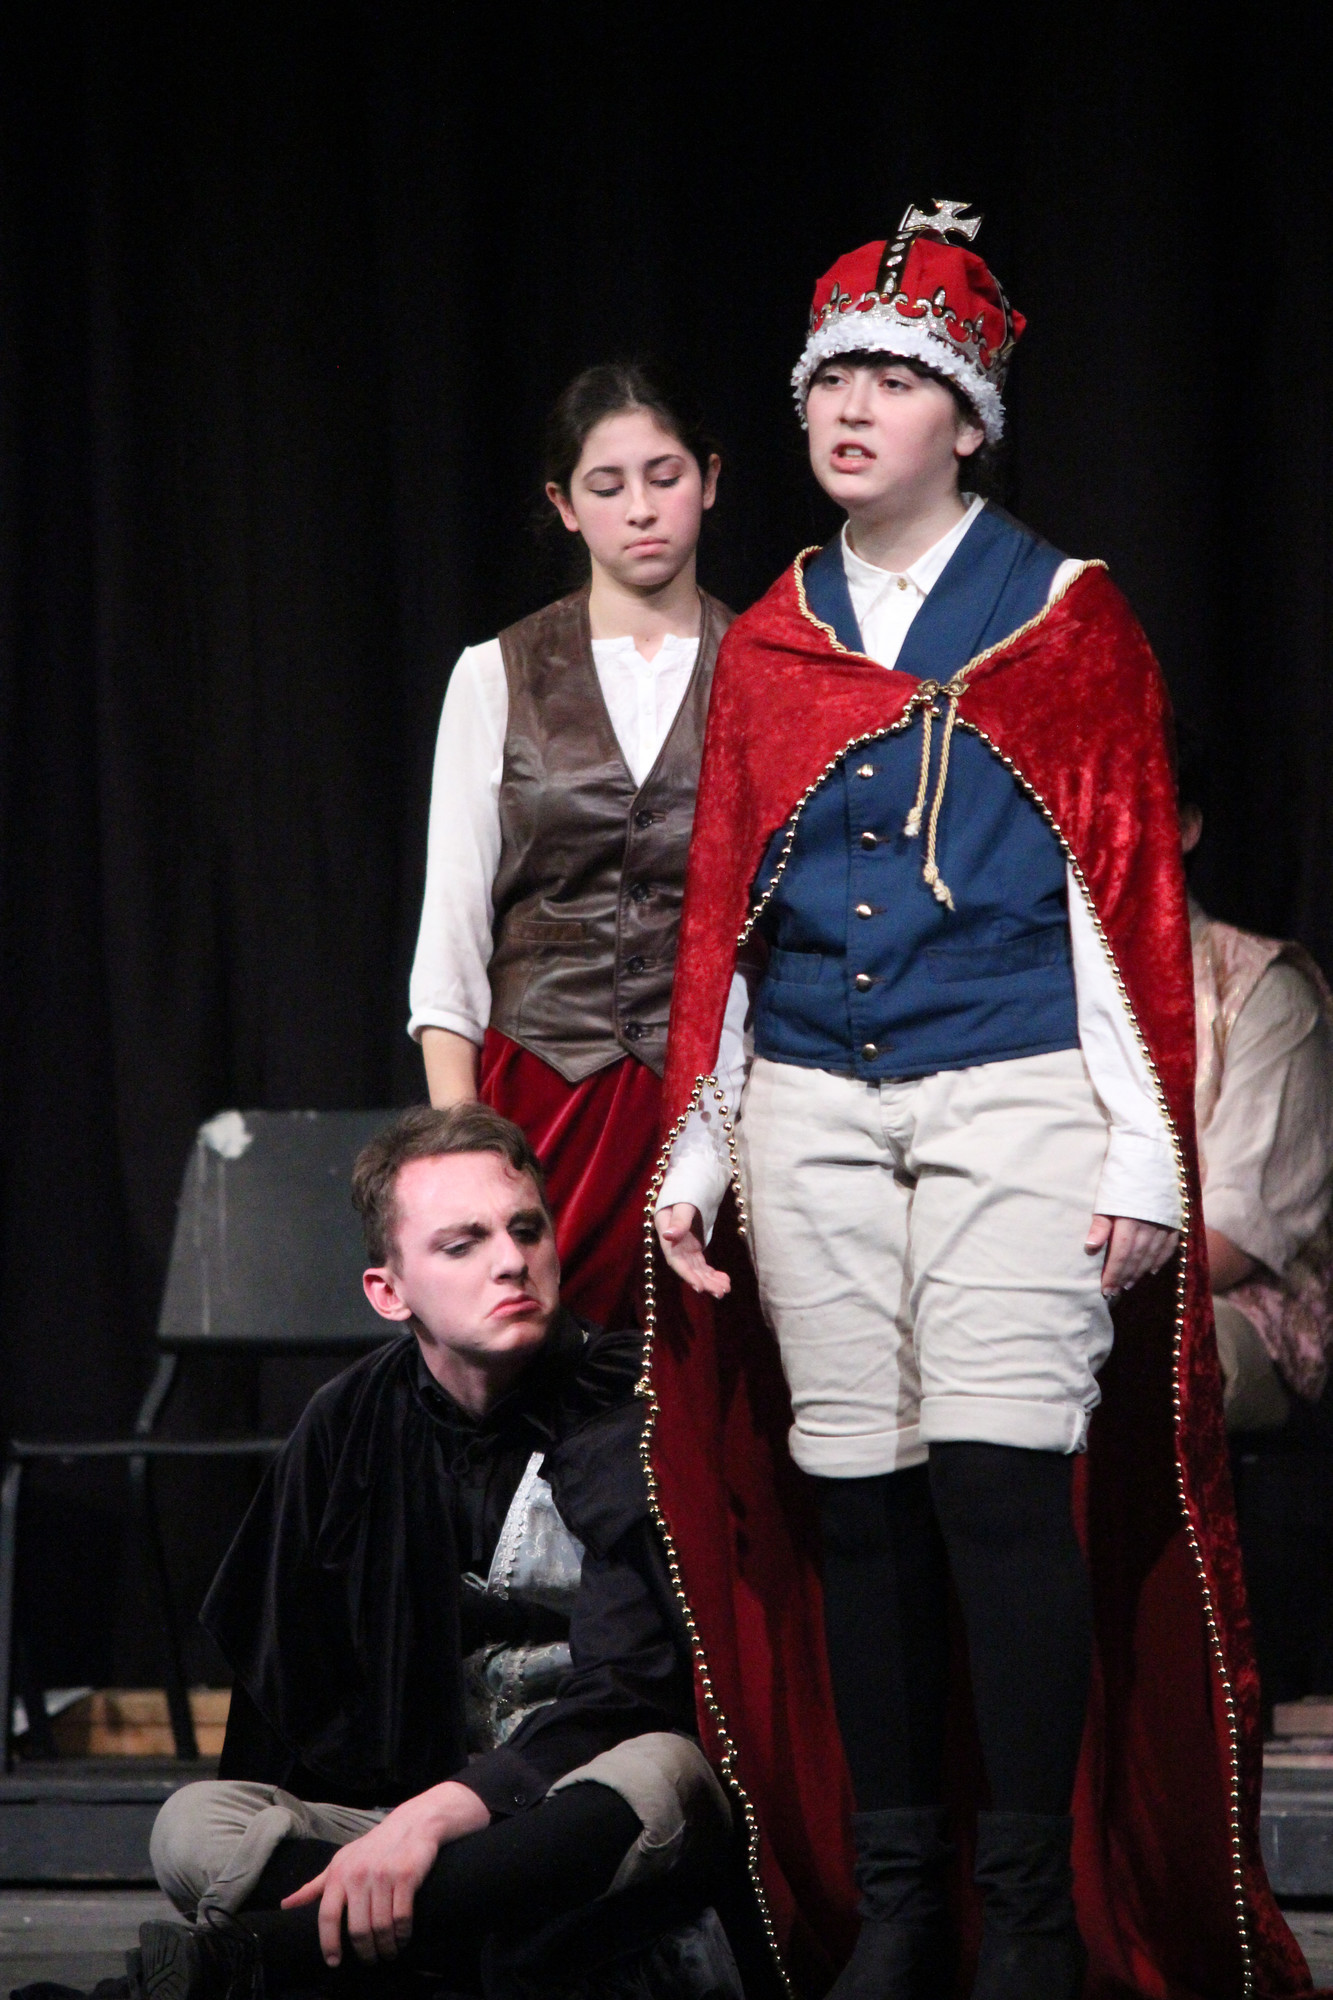 Max LoSardo,  seated, as Hamlet, listens to Horatio, played by Colette Brancaccio, and The King, played by Nadia Tavella.